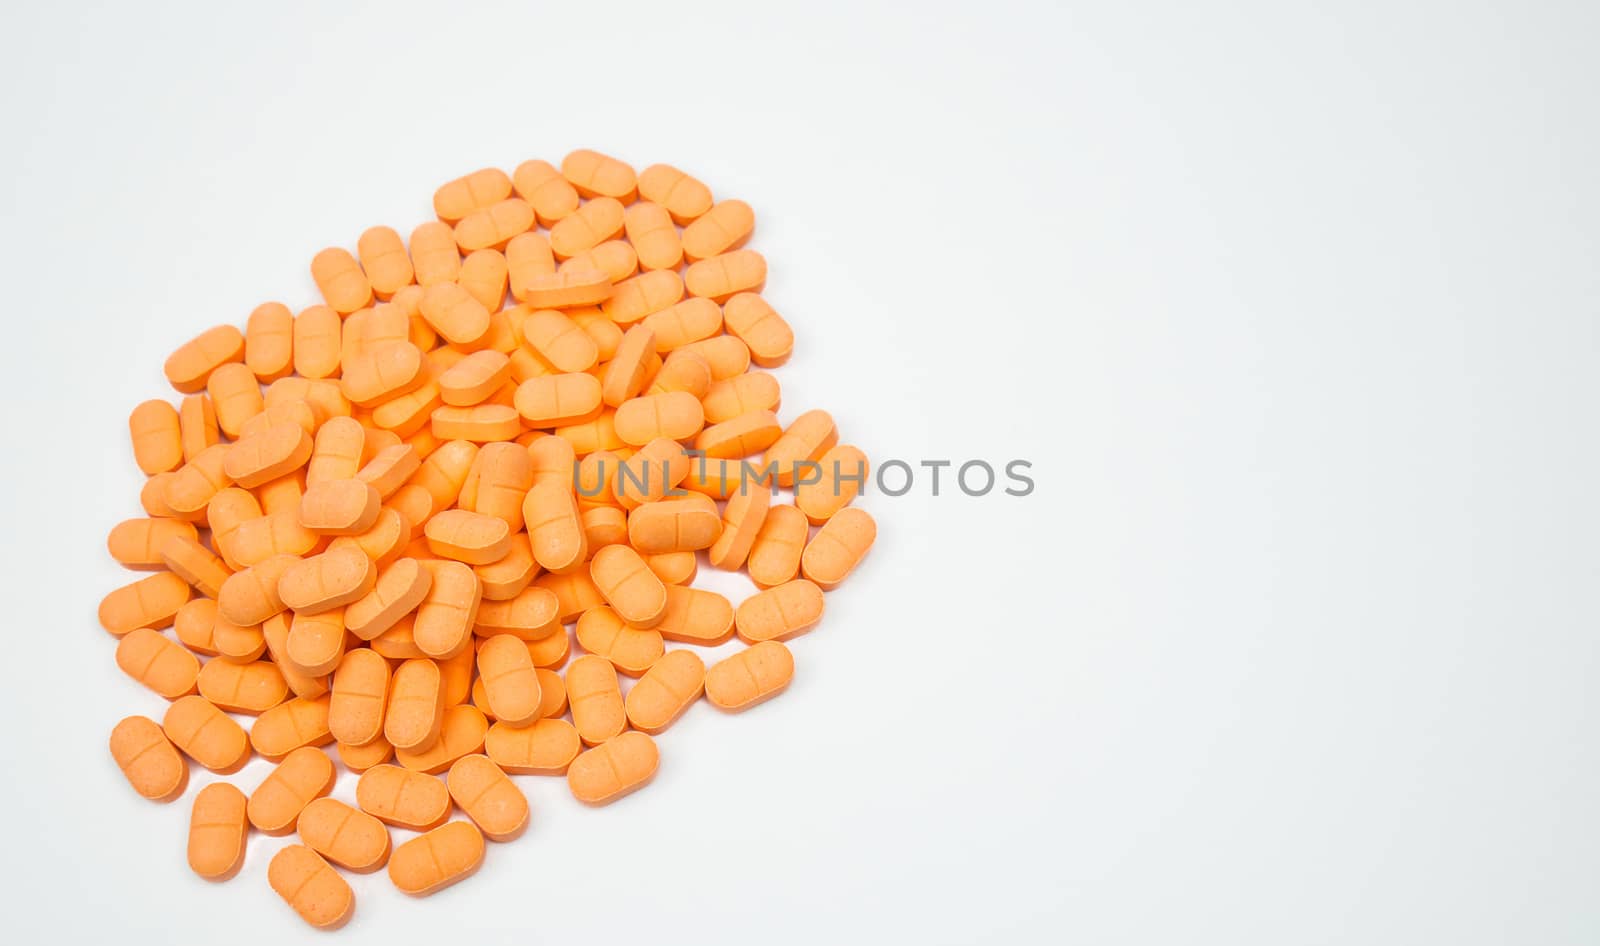 Pile of muscle relaxant, pain relief tablet pills isolated on white background with copy space for text. Pharmaceutical industry production. Pharmacy background. Orange tablets pill. by Fahroni